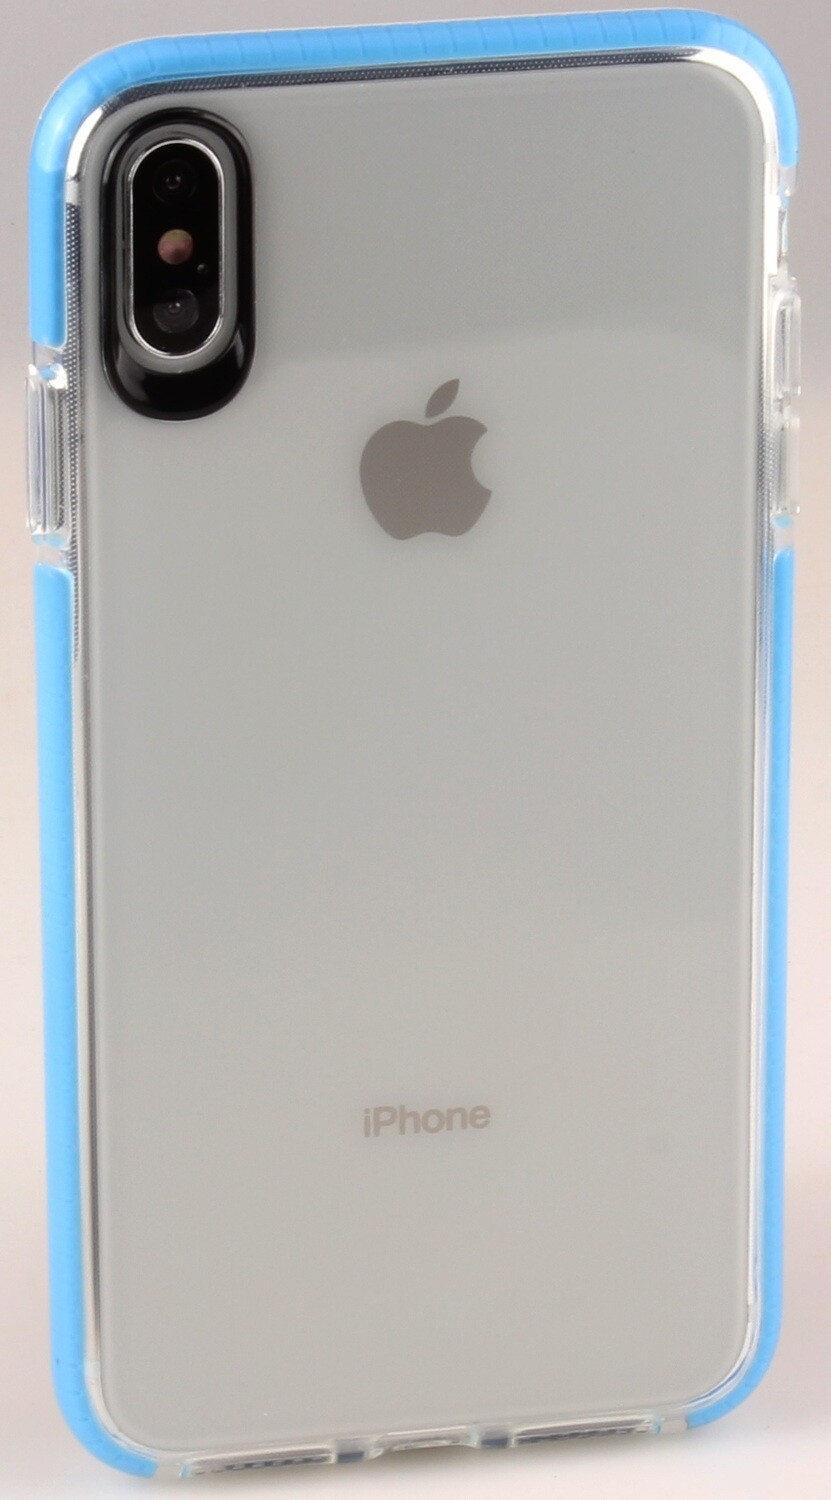 iPhone 6 / 6s / 7 / 8 / SE 2020 4.7 Clear iClear Collection Back Case